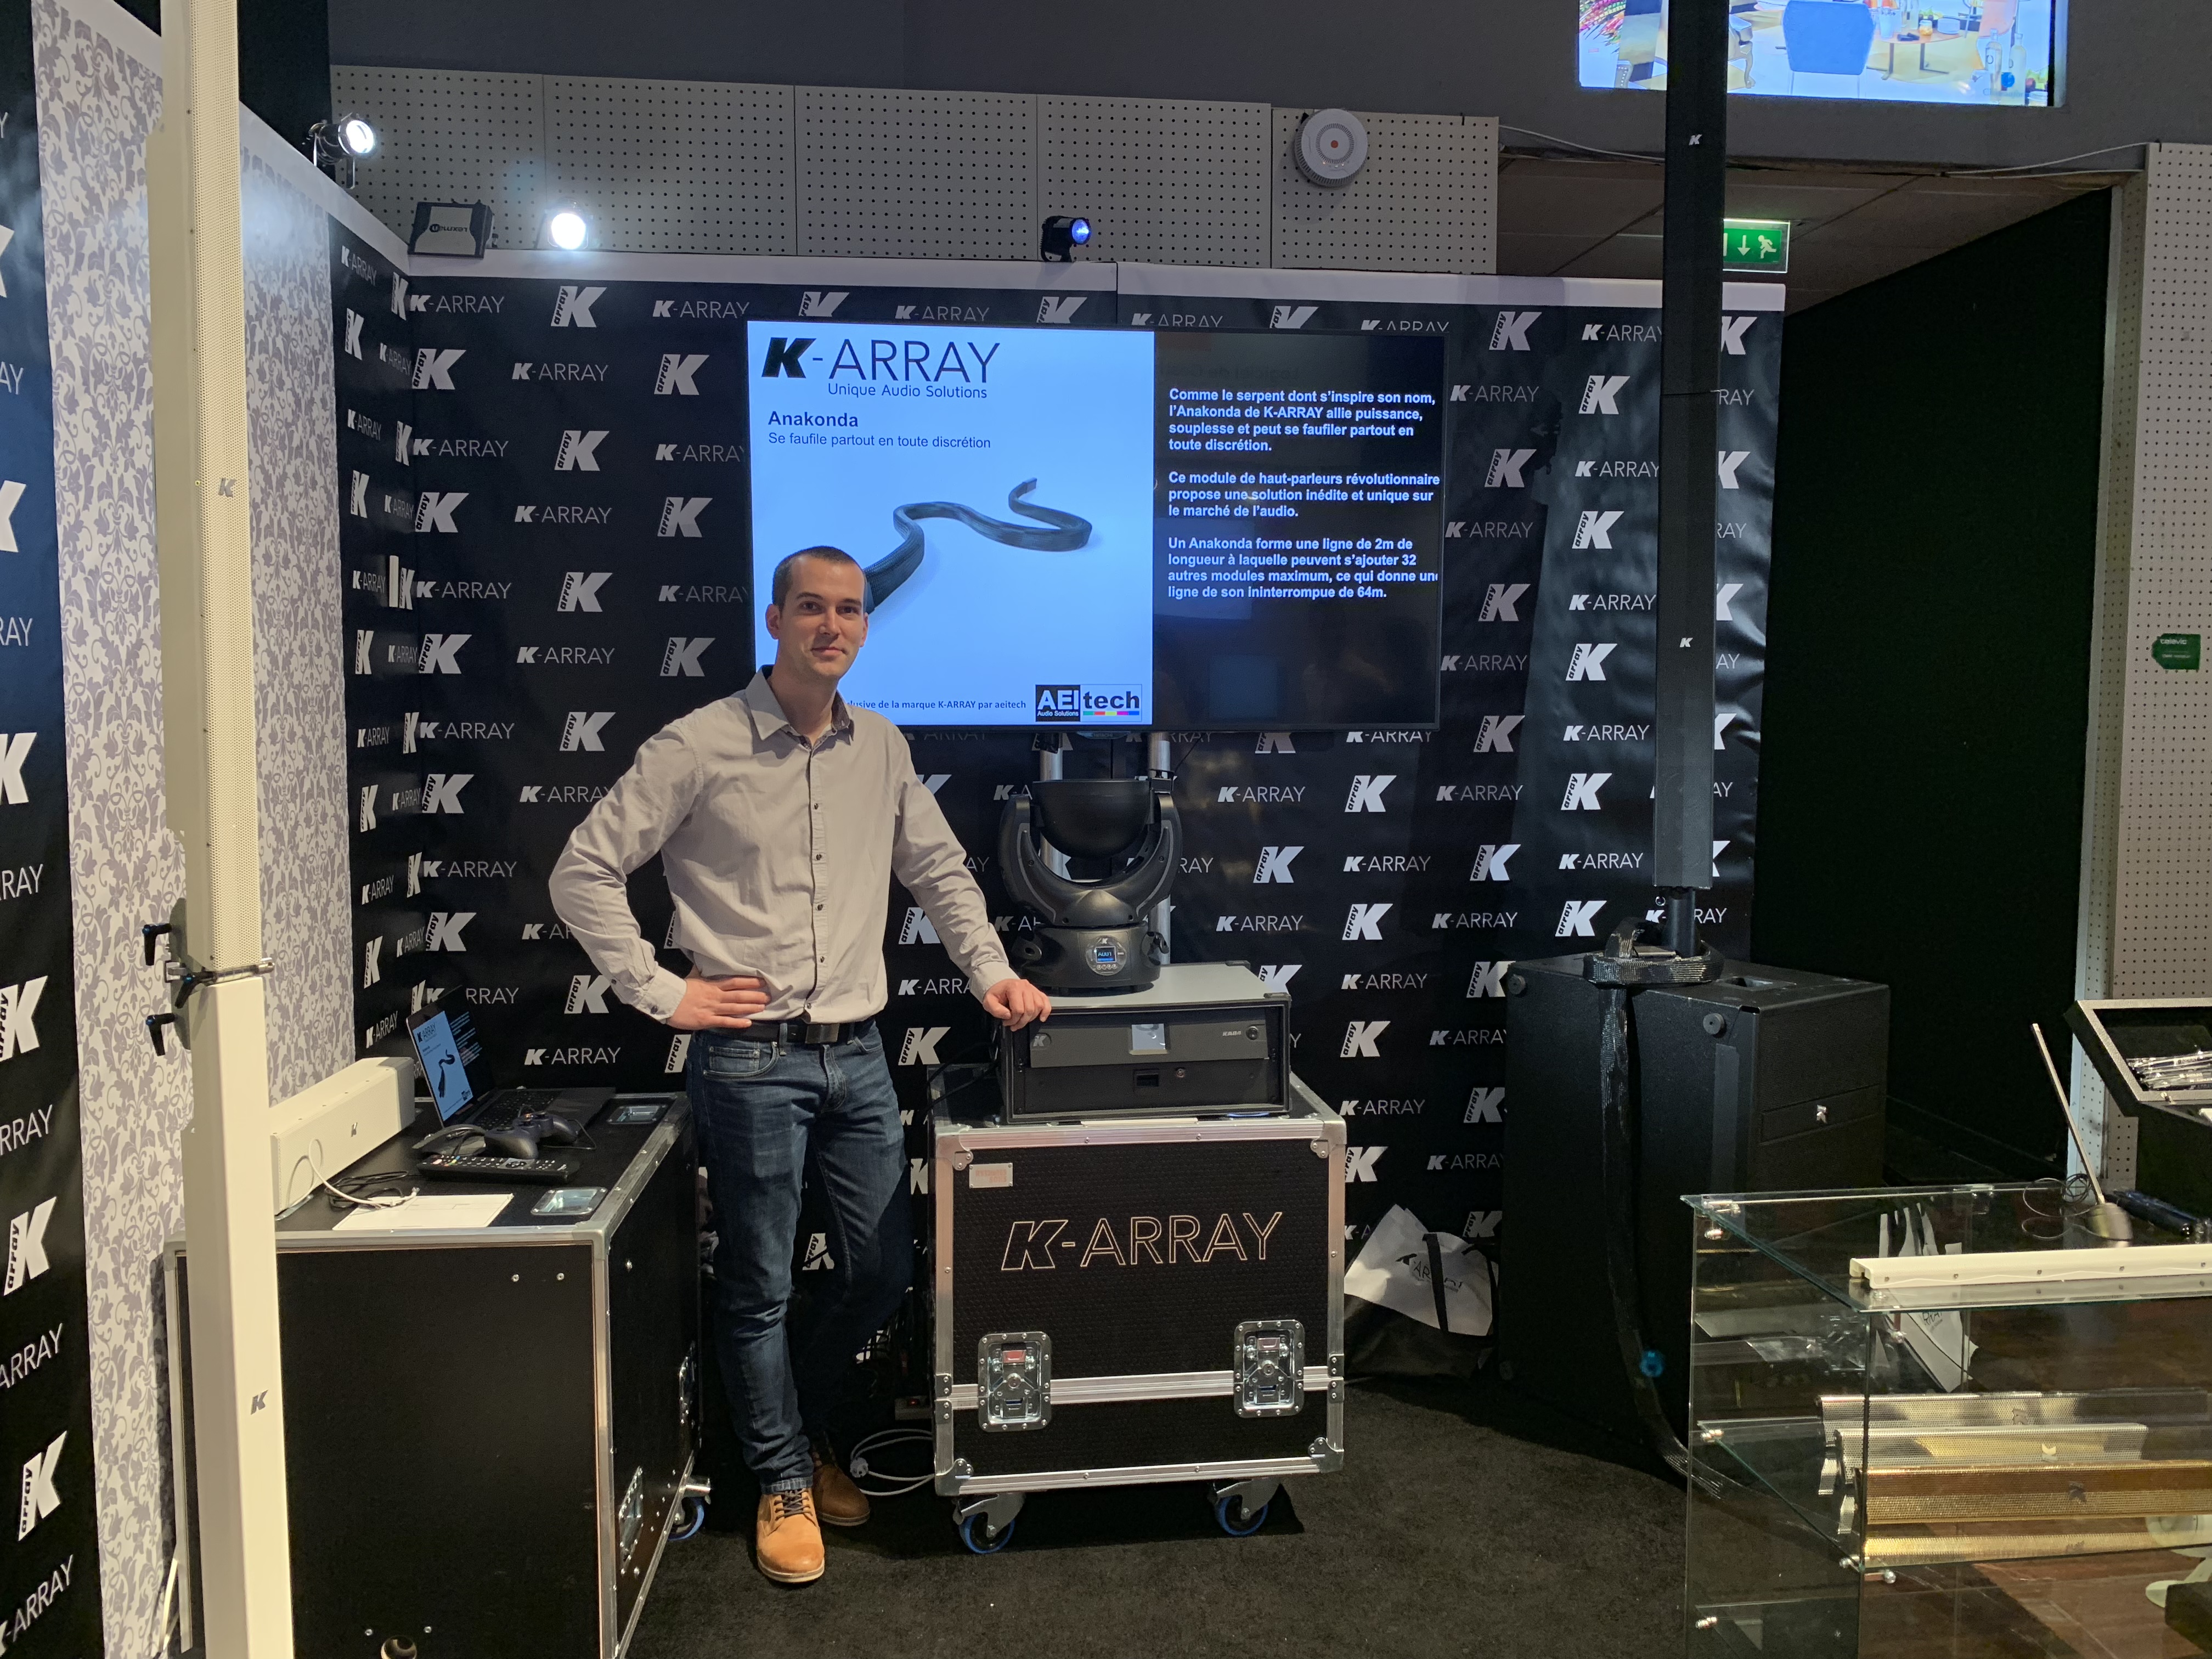 Stand K-ARRAY